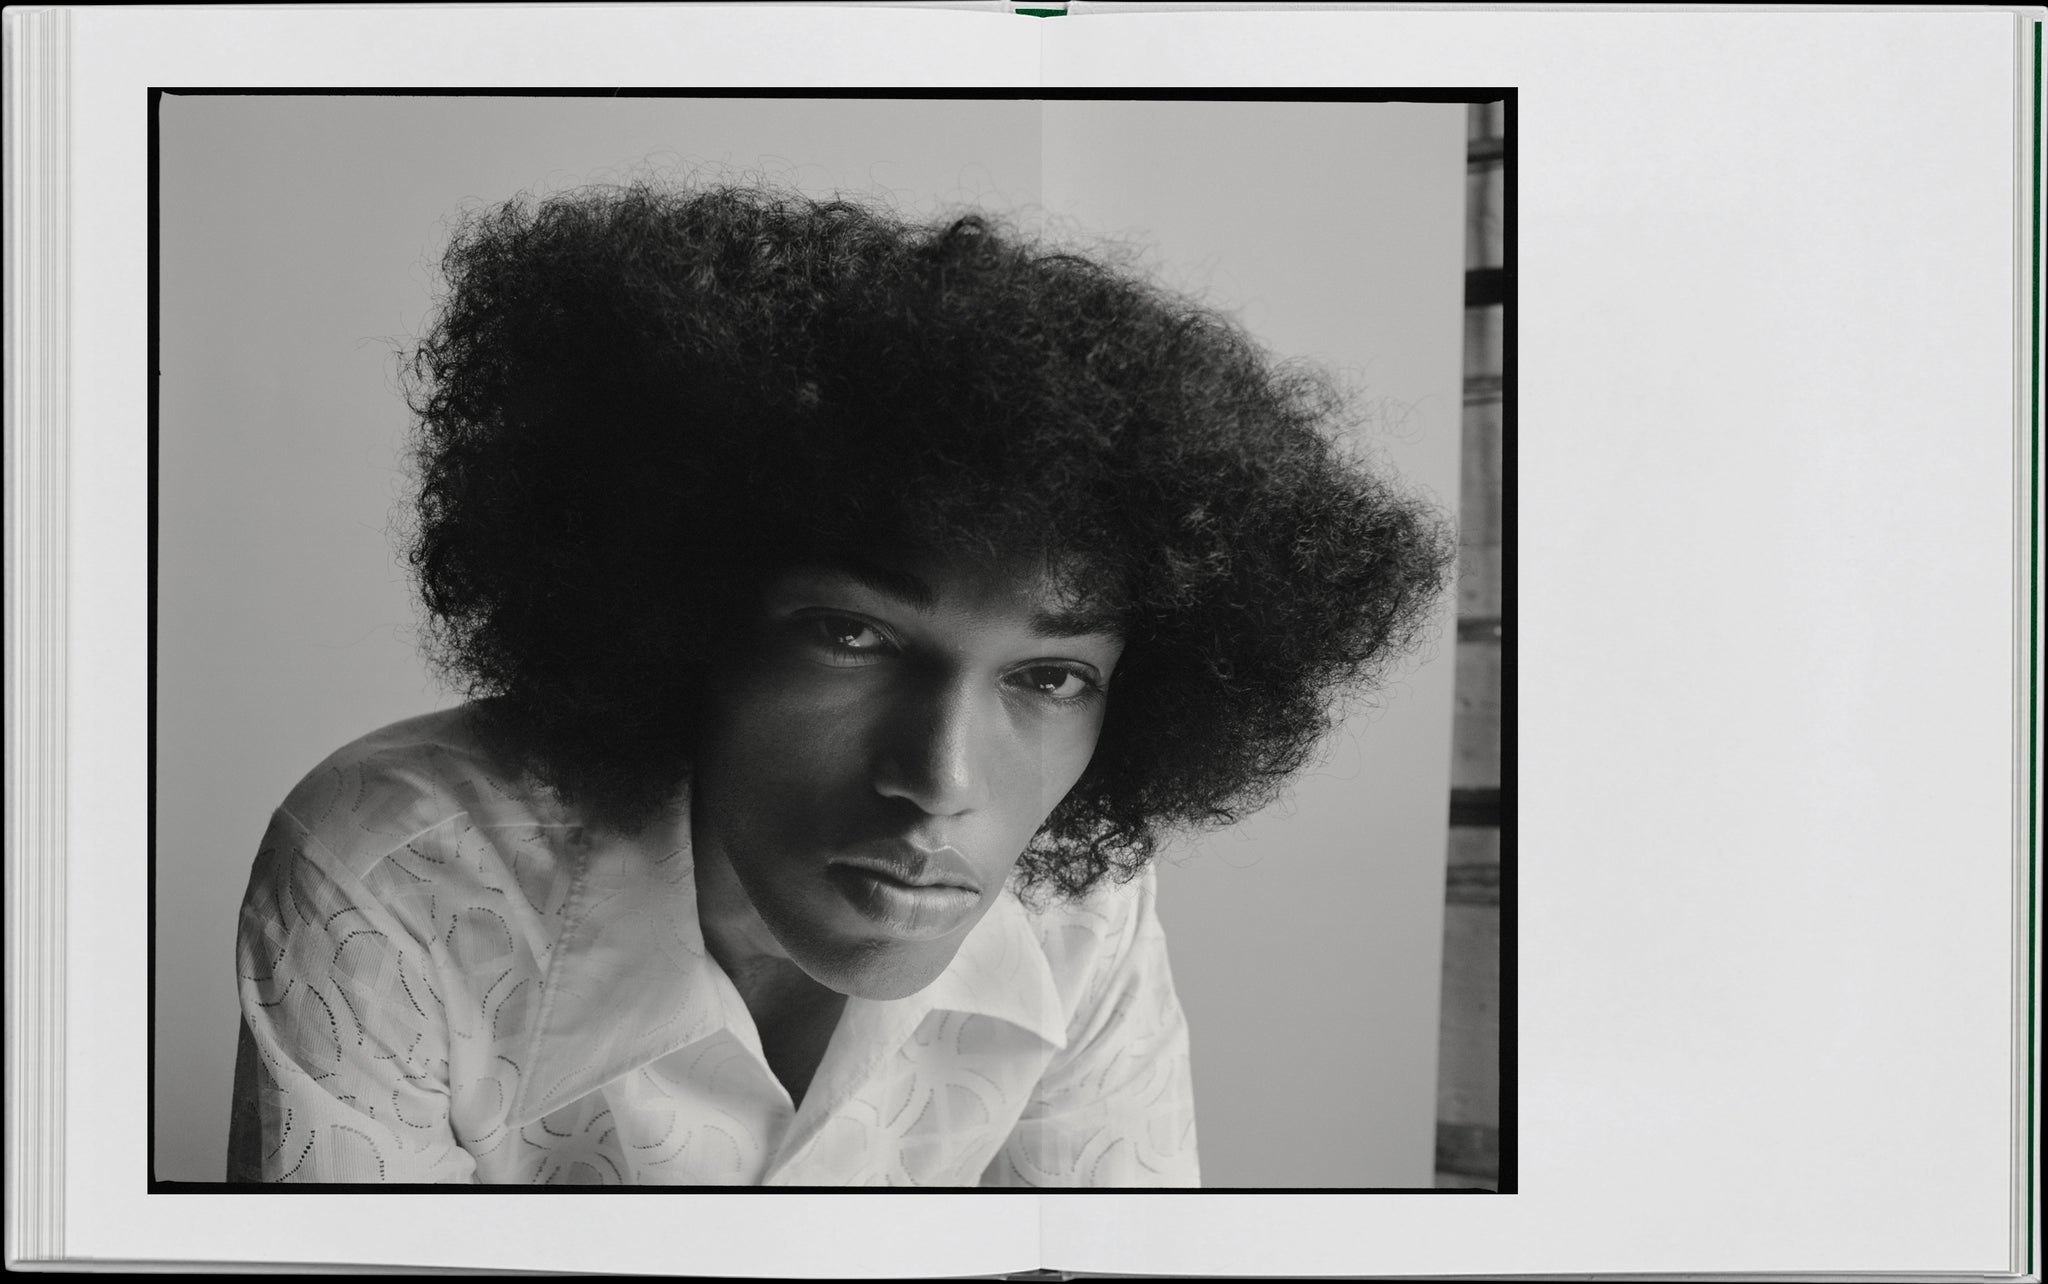 Book layout. Double Spread. A portrait of a man in a white shirt. He has an afro that is flattened along the top.